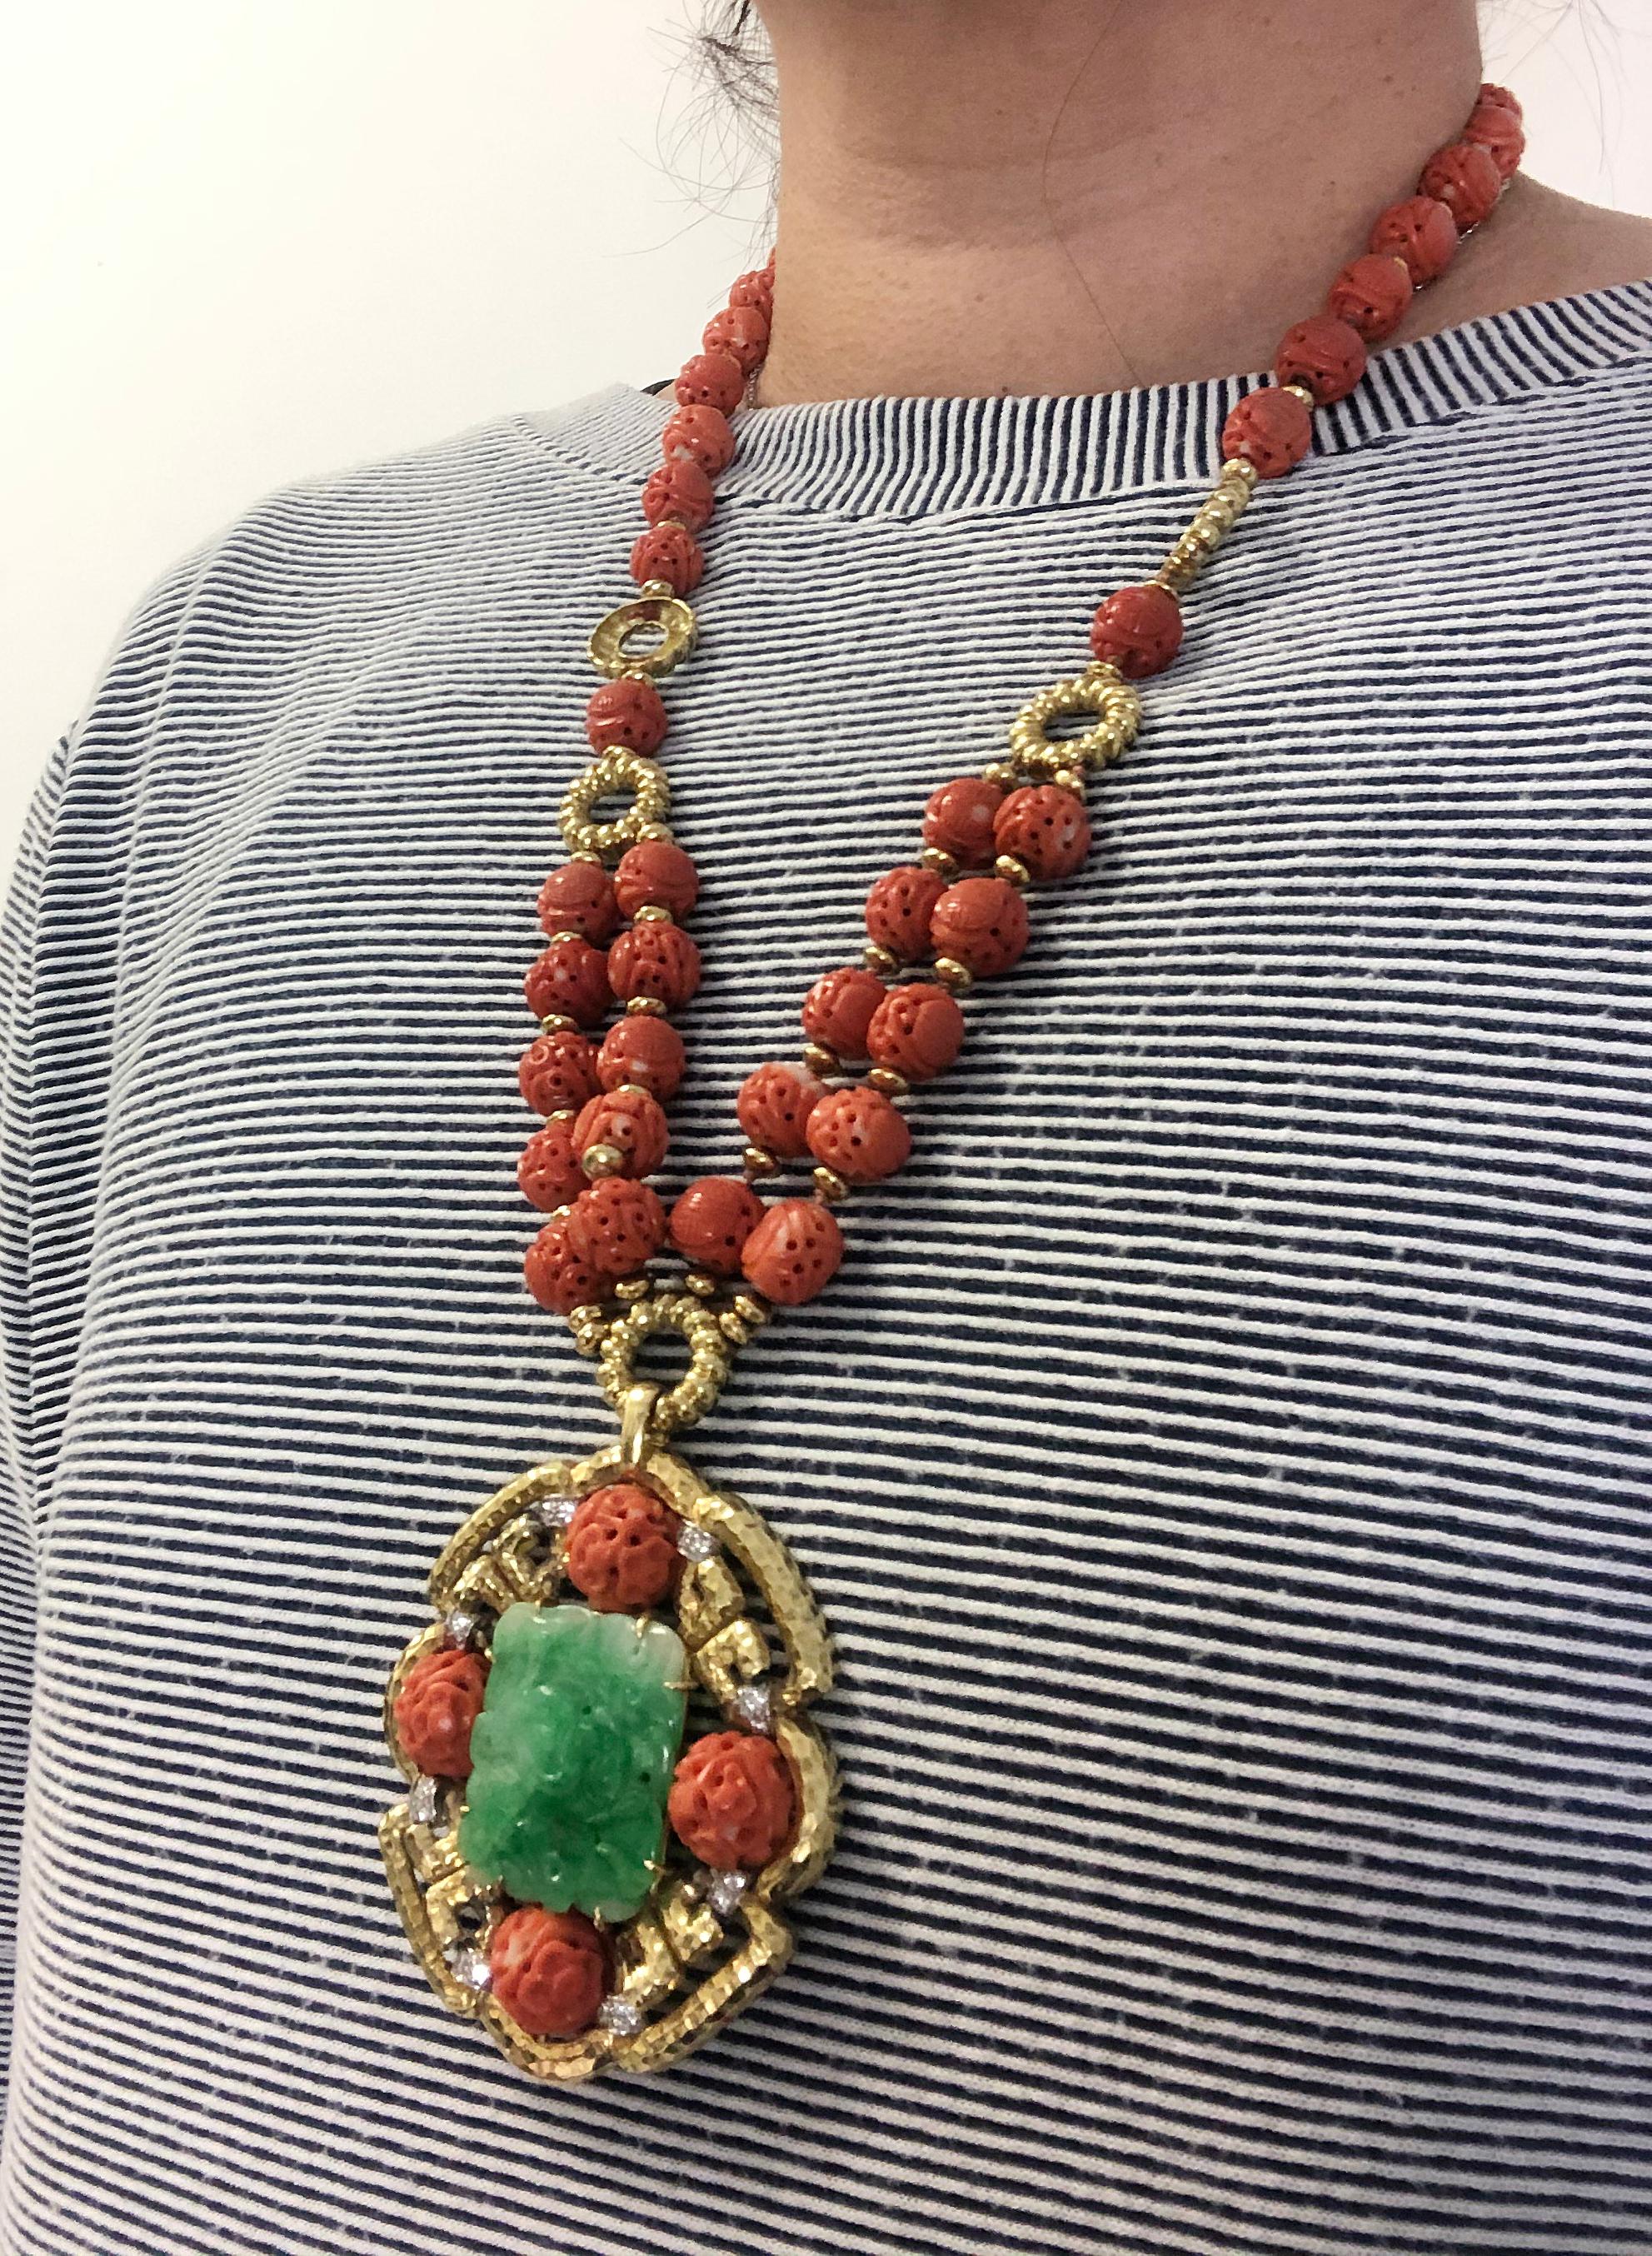 VAN CLEEF & ARPELS Carved Coral Beads, Jade, Diamond Necklace

18k yellow gold pendant necklace, set with diamonds, carved coral beads, and jade, signed Van Cleef & Arpels.
Measures necklace approx. 26″ in total length and pendant 2.75″ in length by